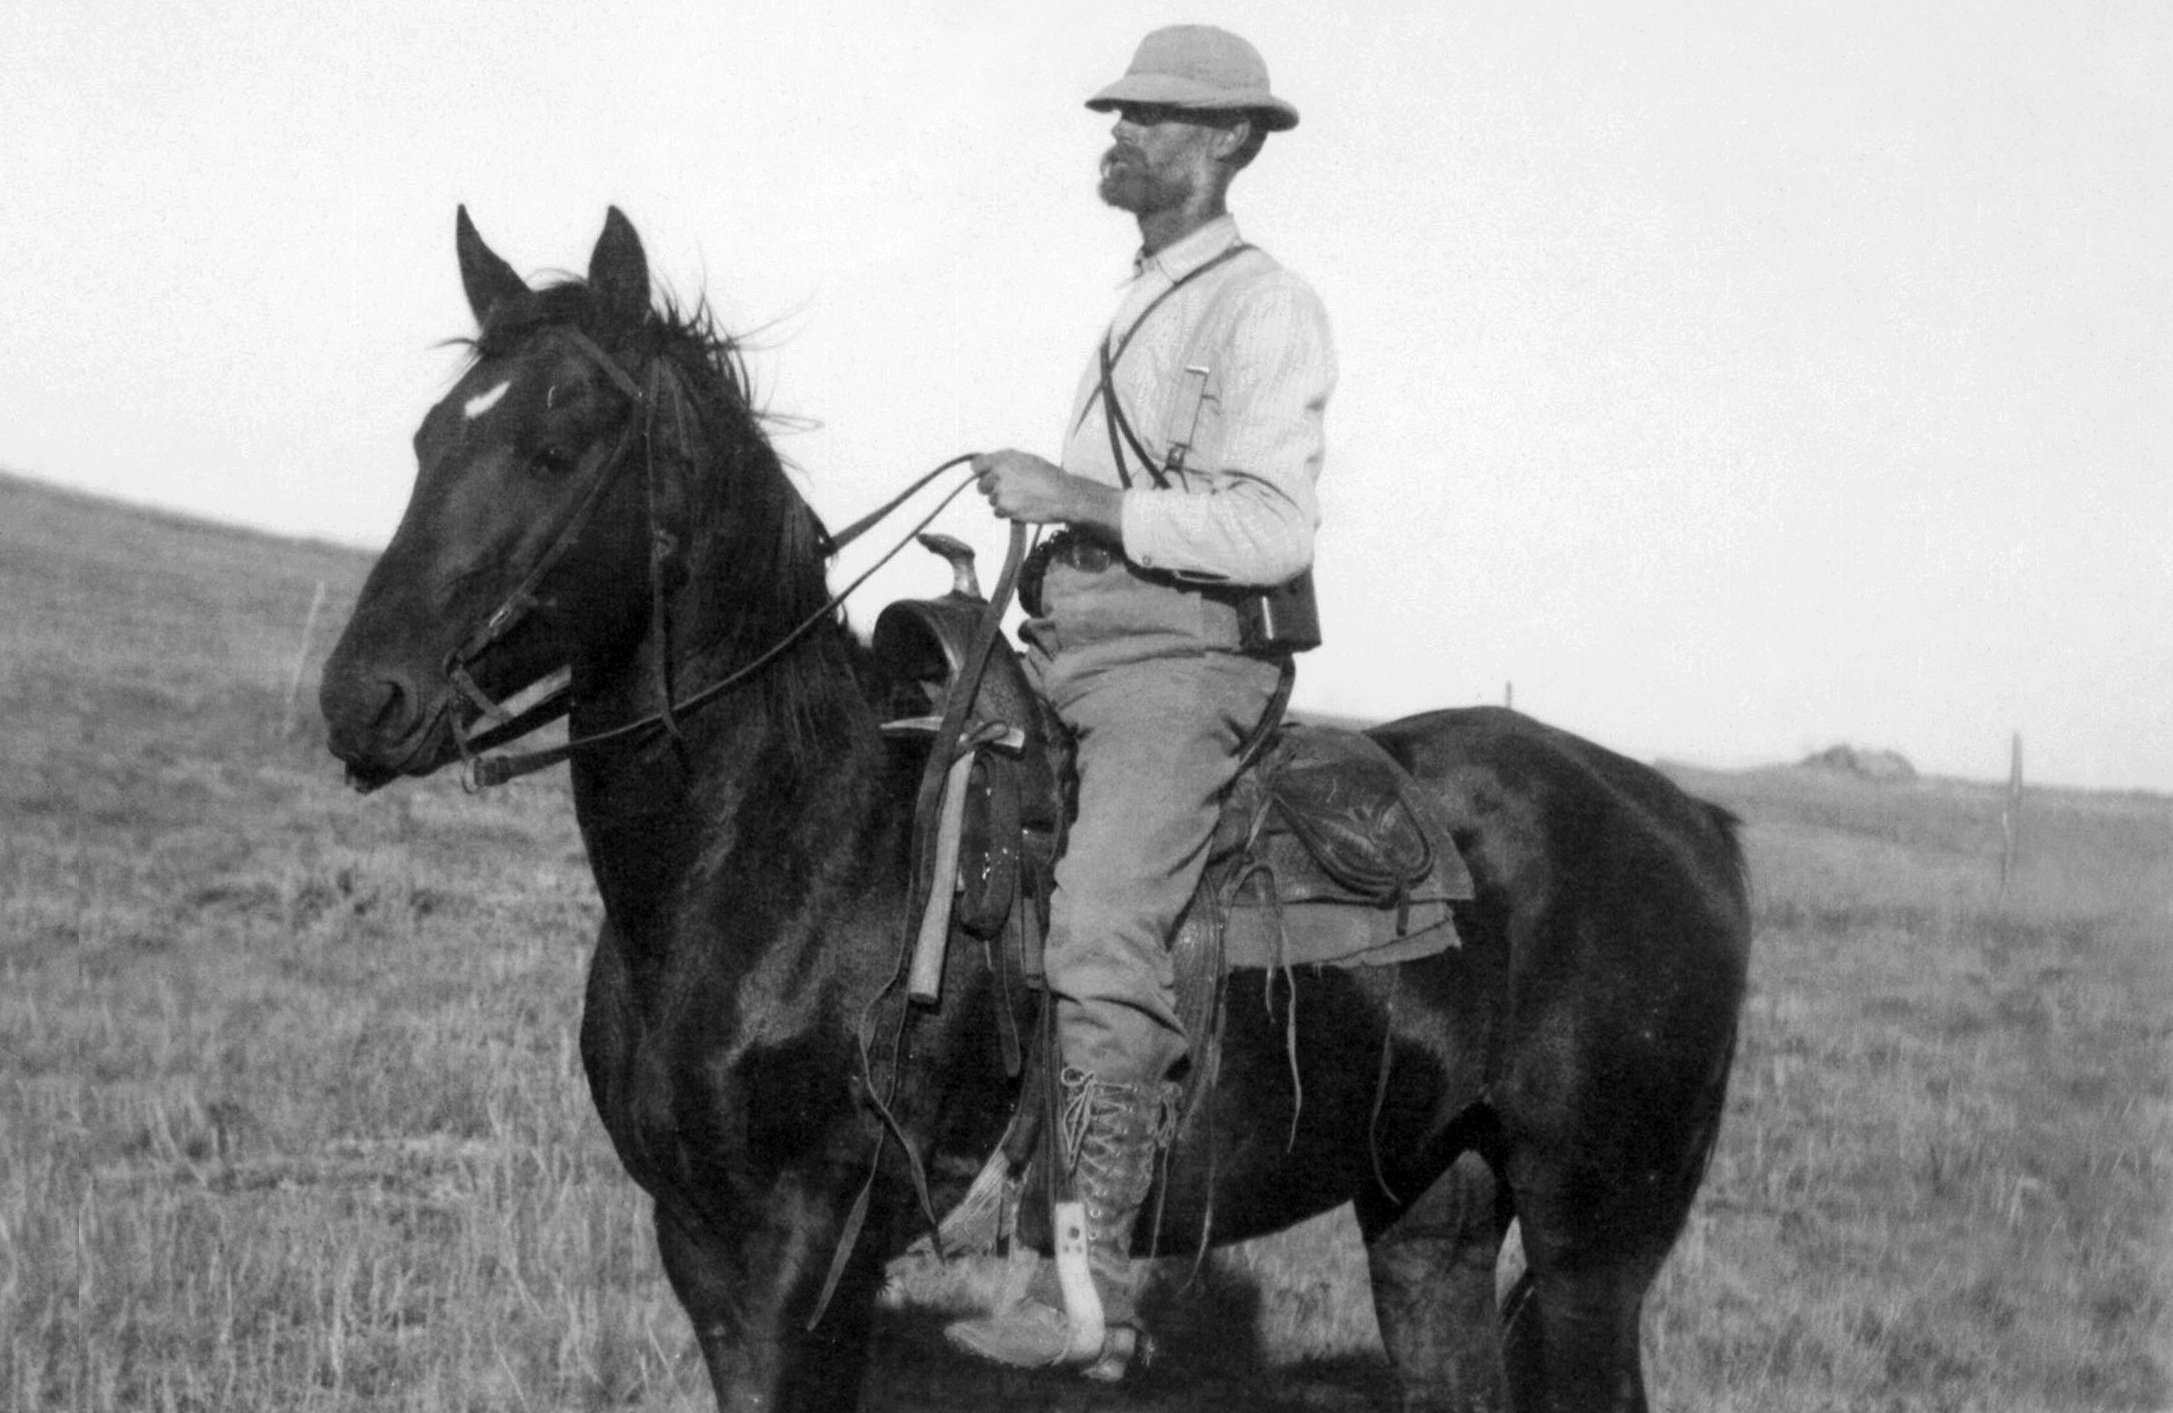 A black and white photo of a man riding a horse.